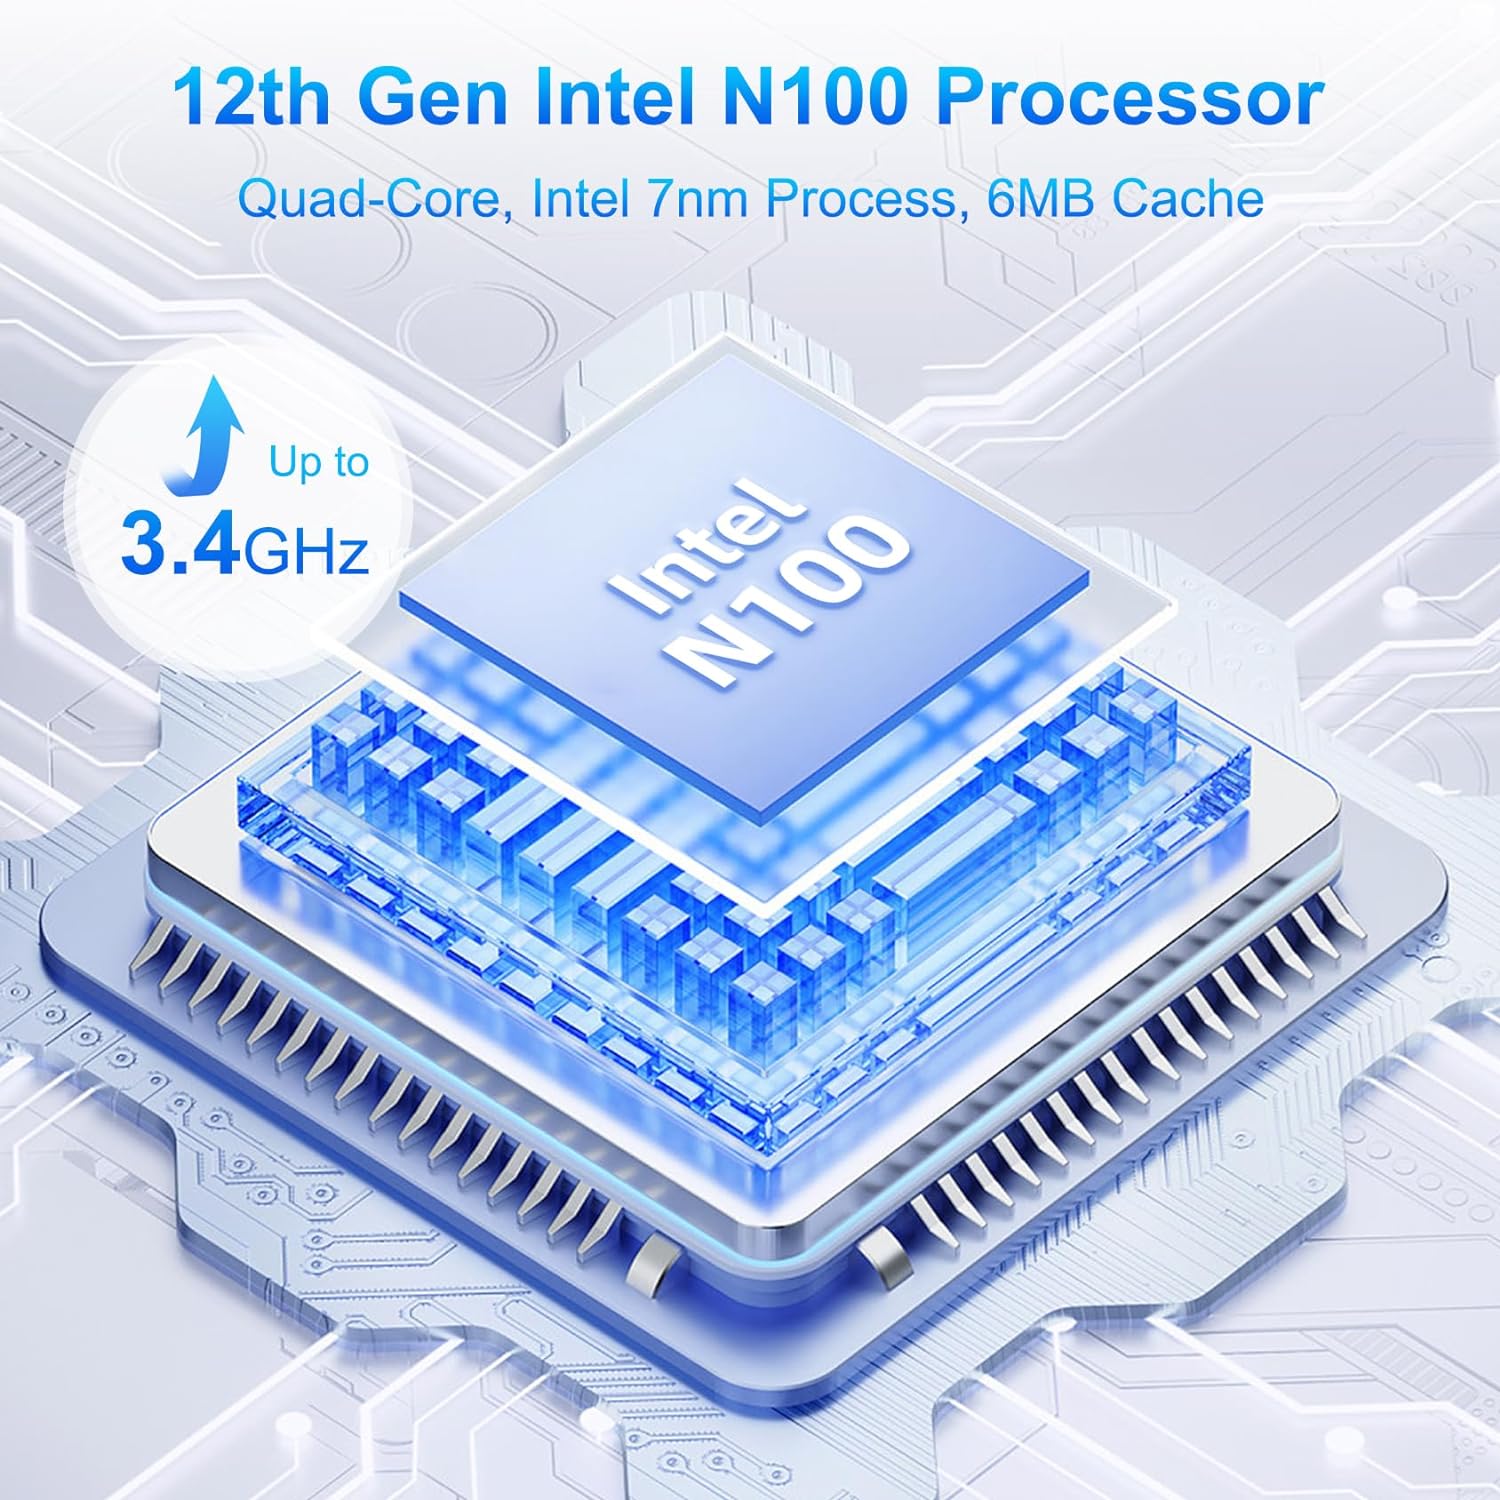 Powerful Intel N100 processor】 Laptop is equipped with a powerful 12th generation Intel N100 processor,